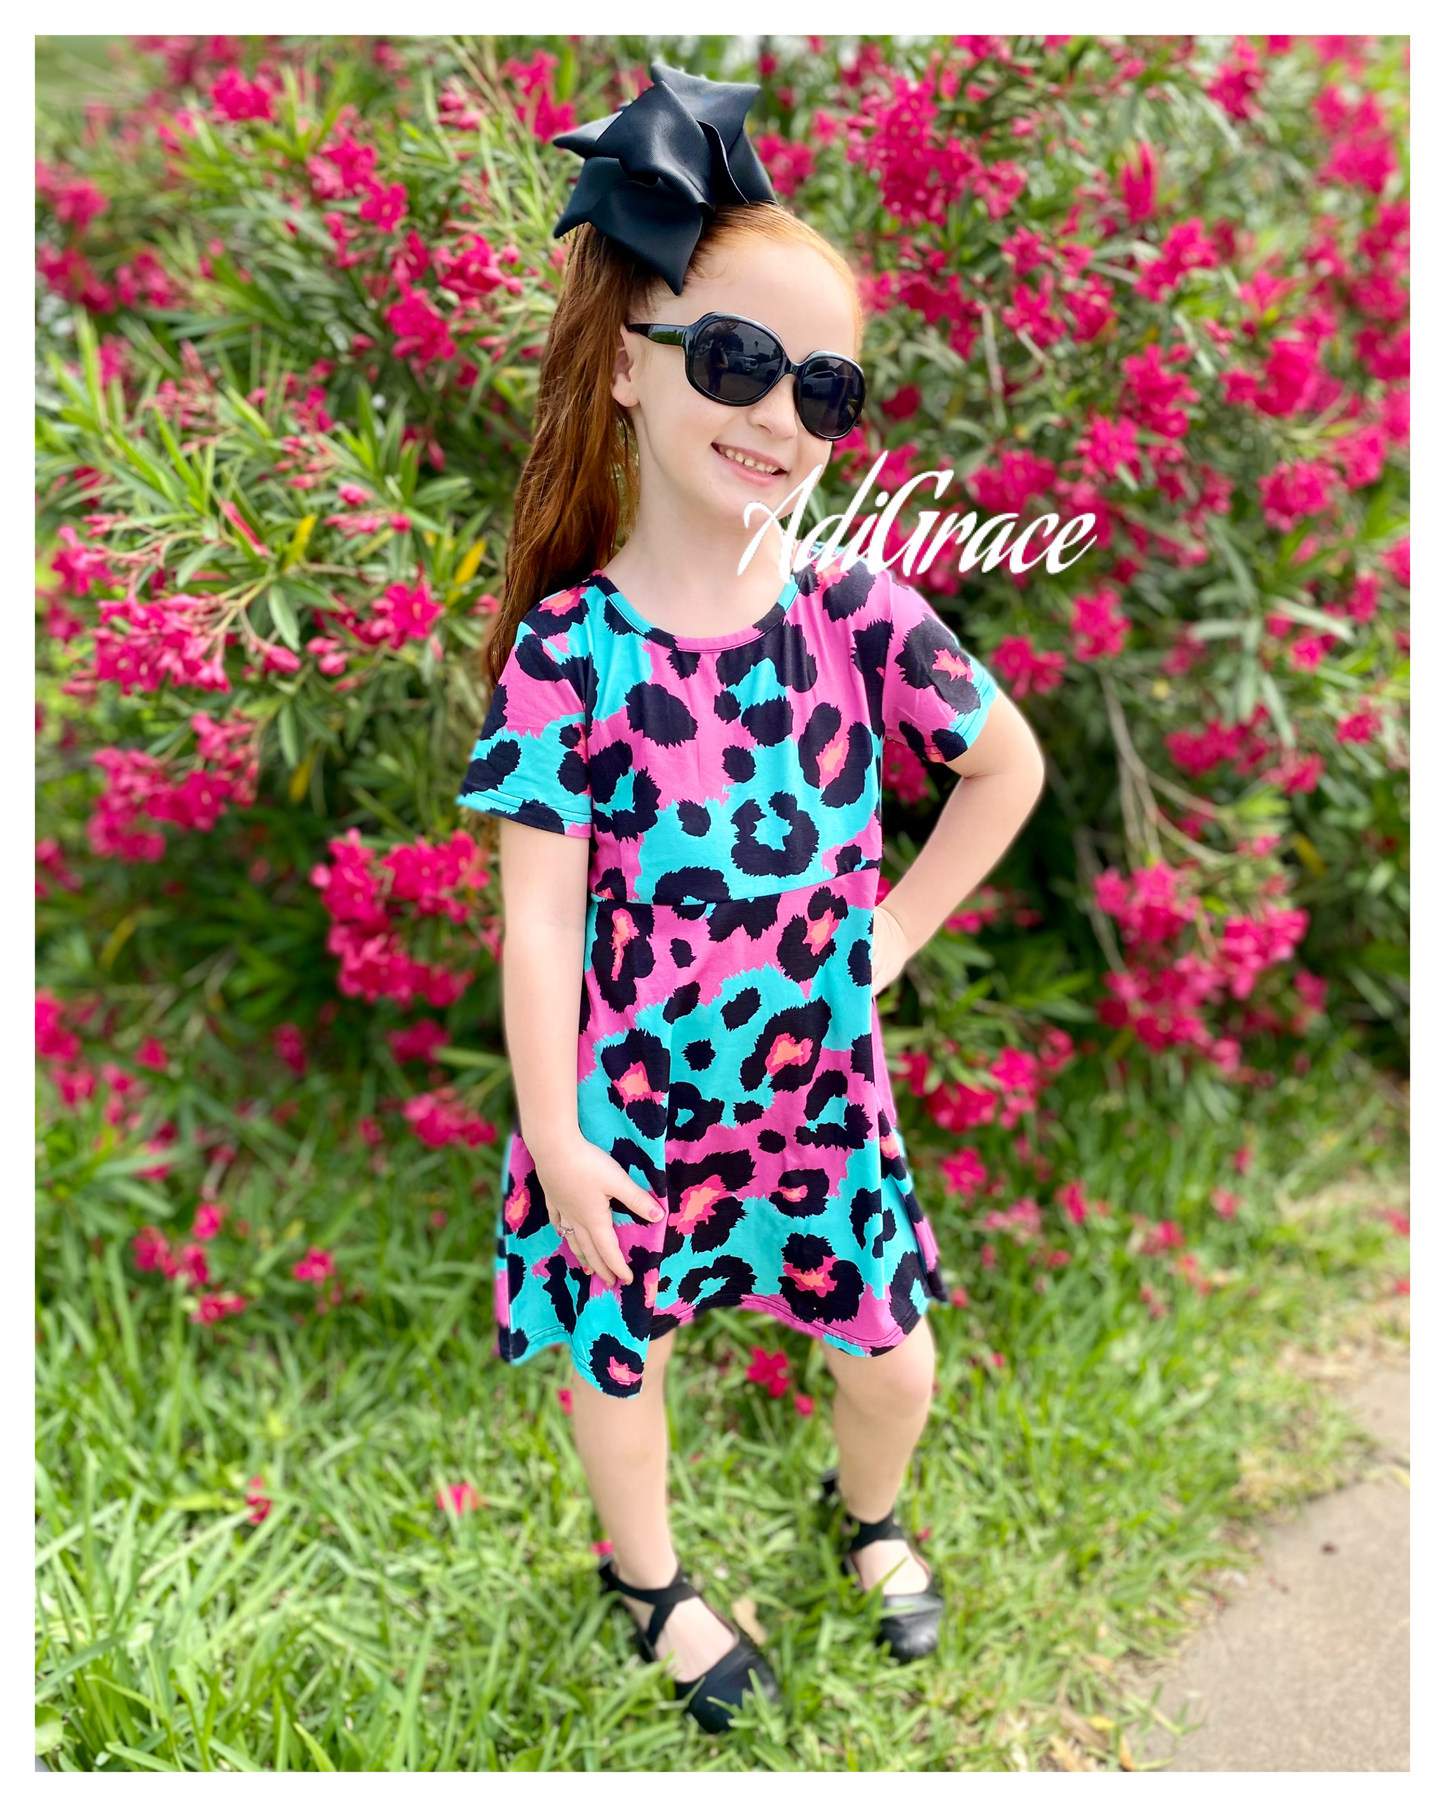 Turquoise and Pink Leopard Dress